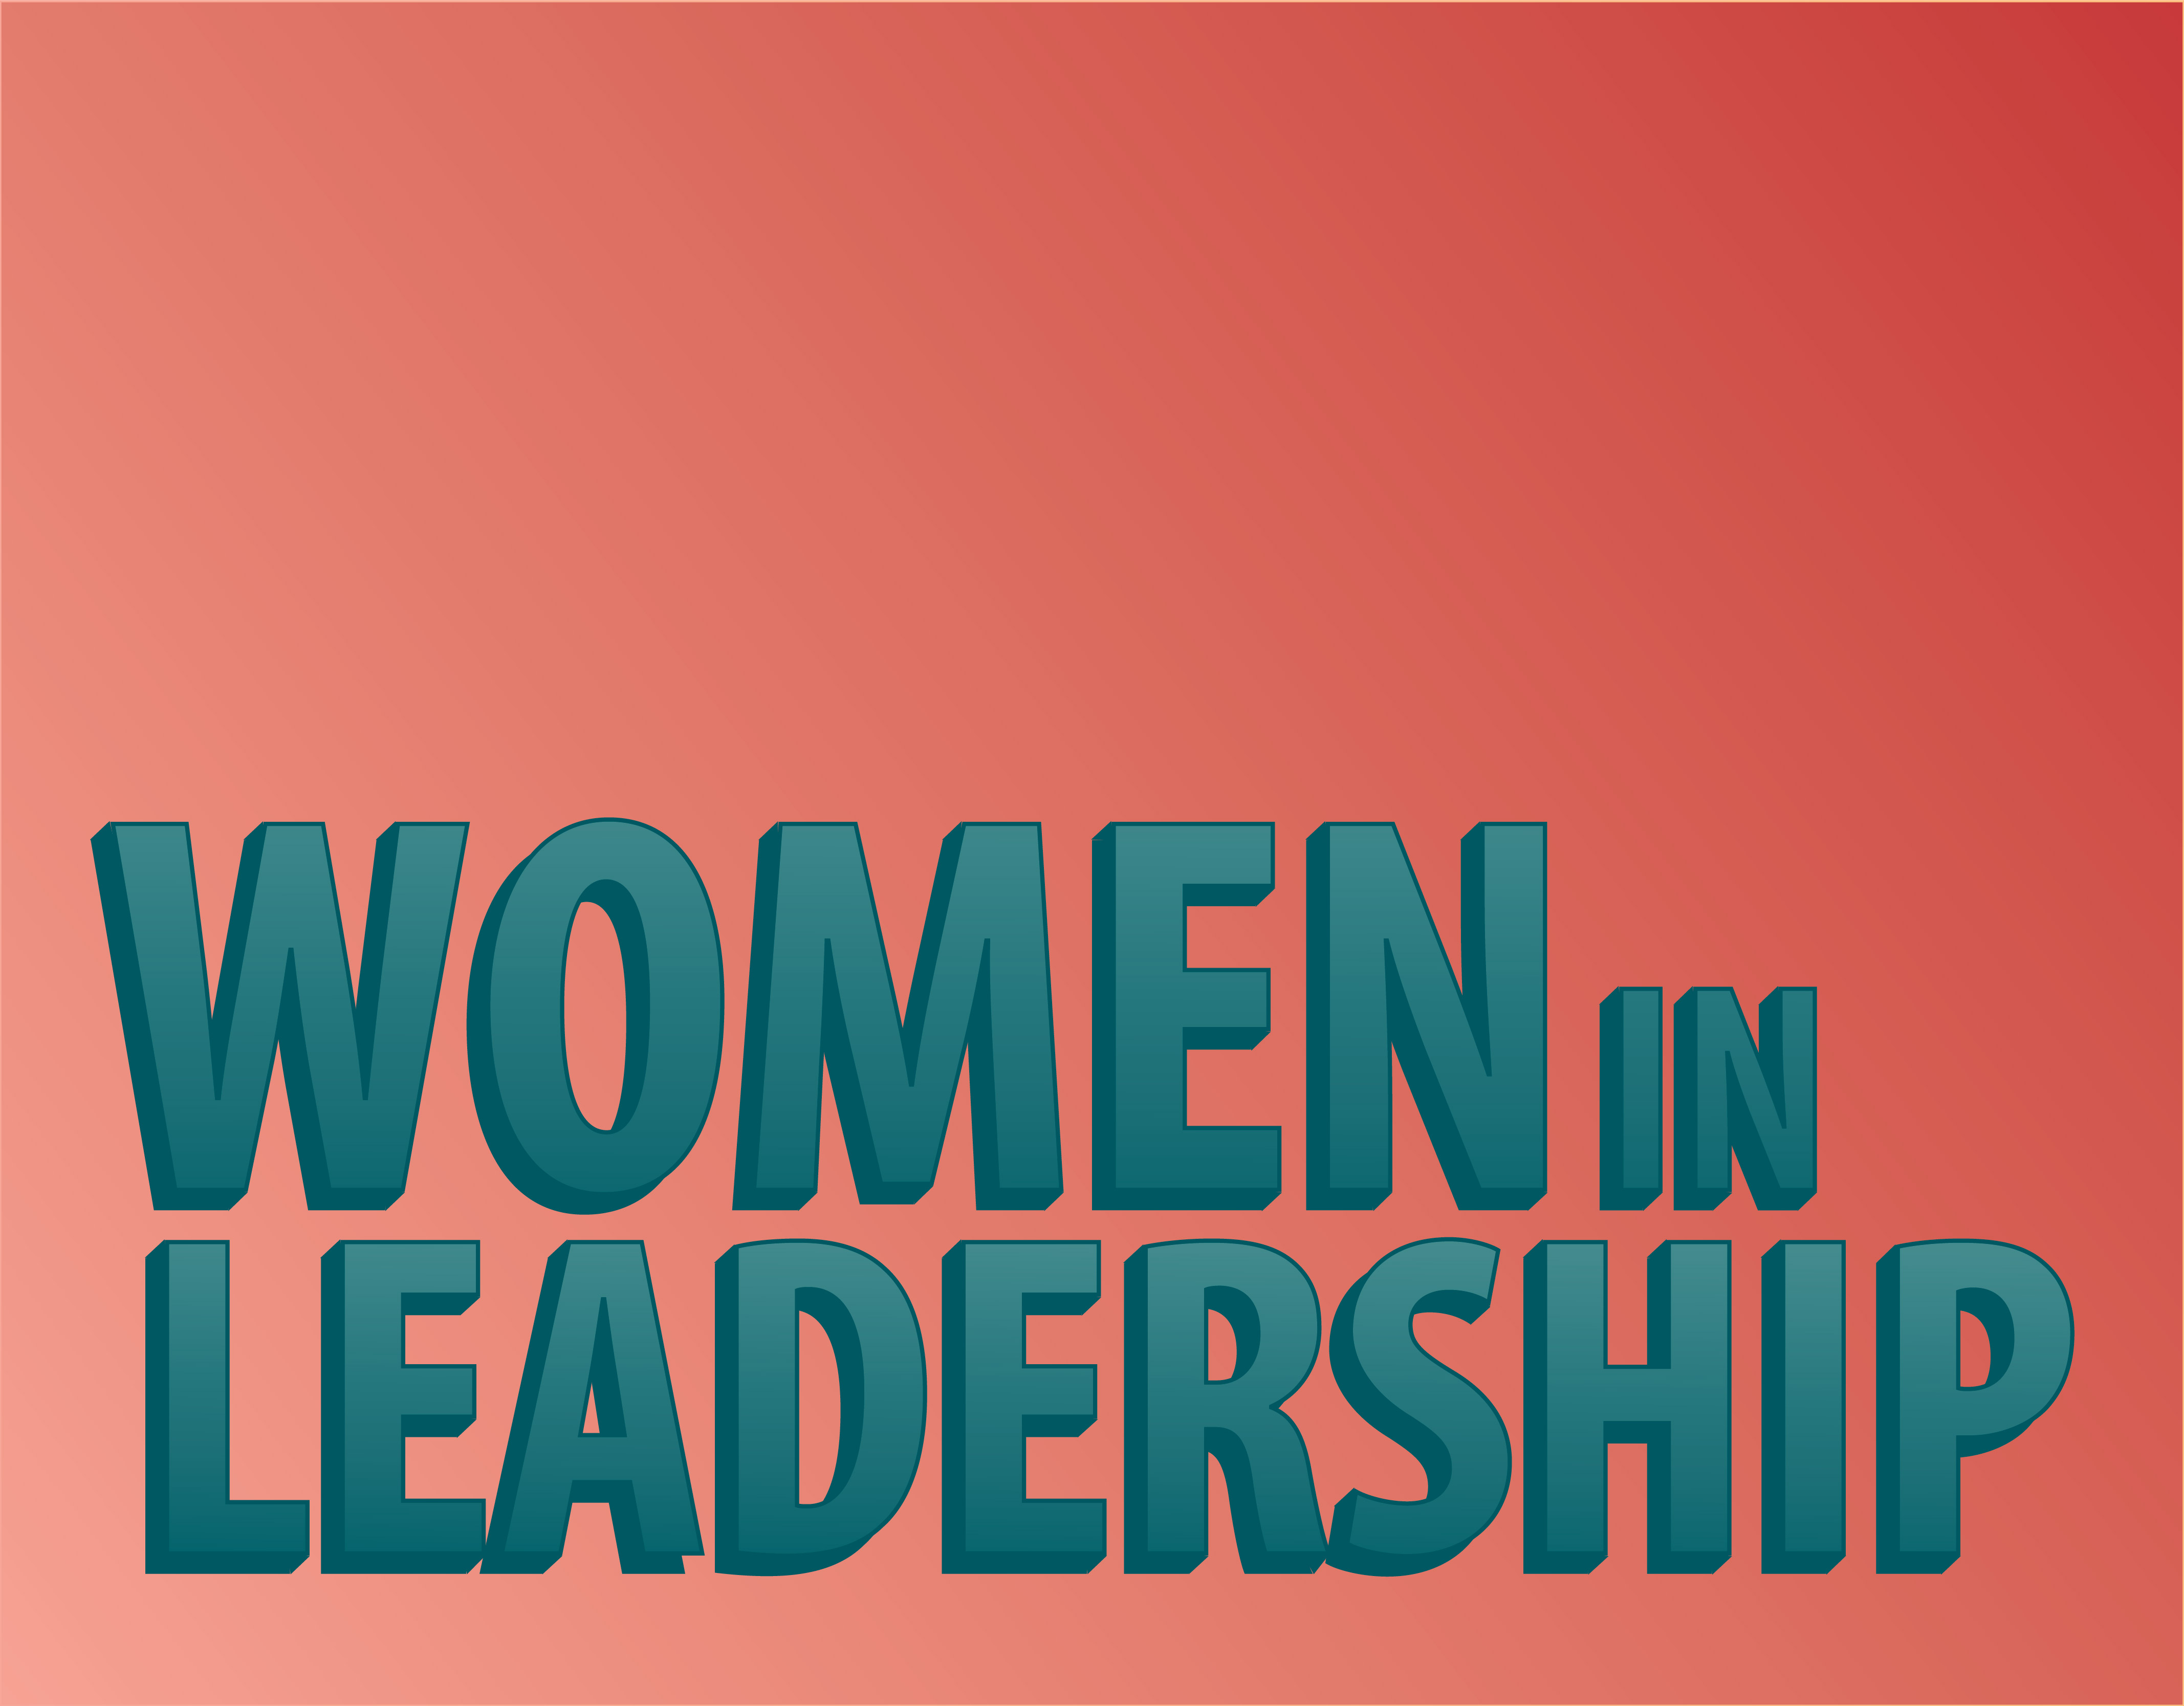 Women in leadership: Year of the woman